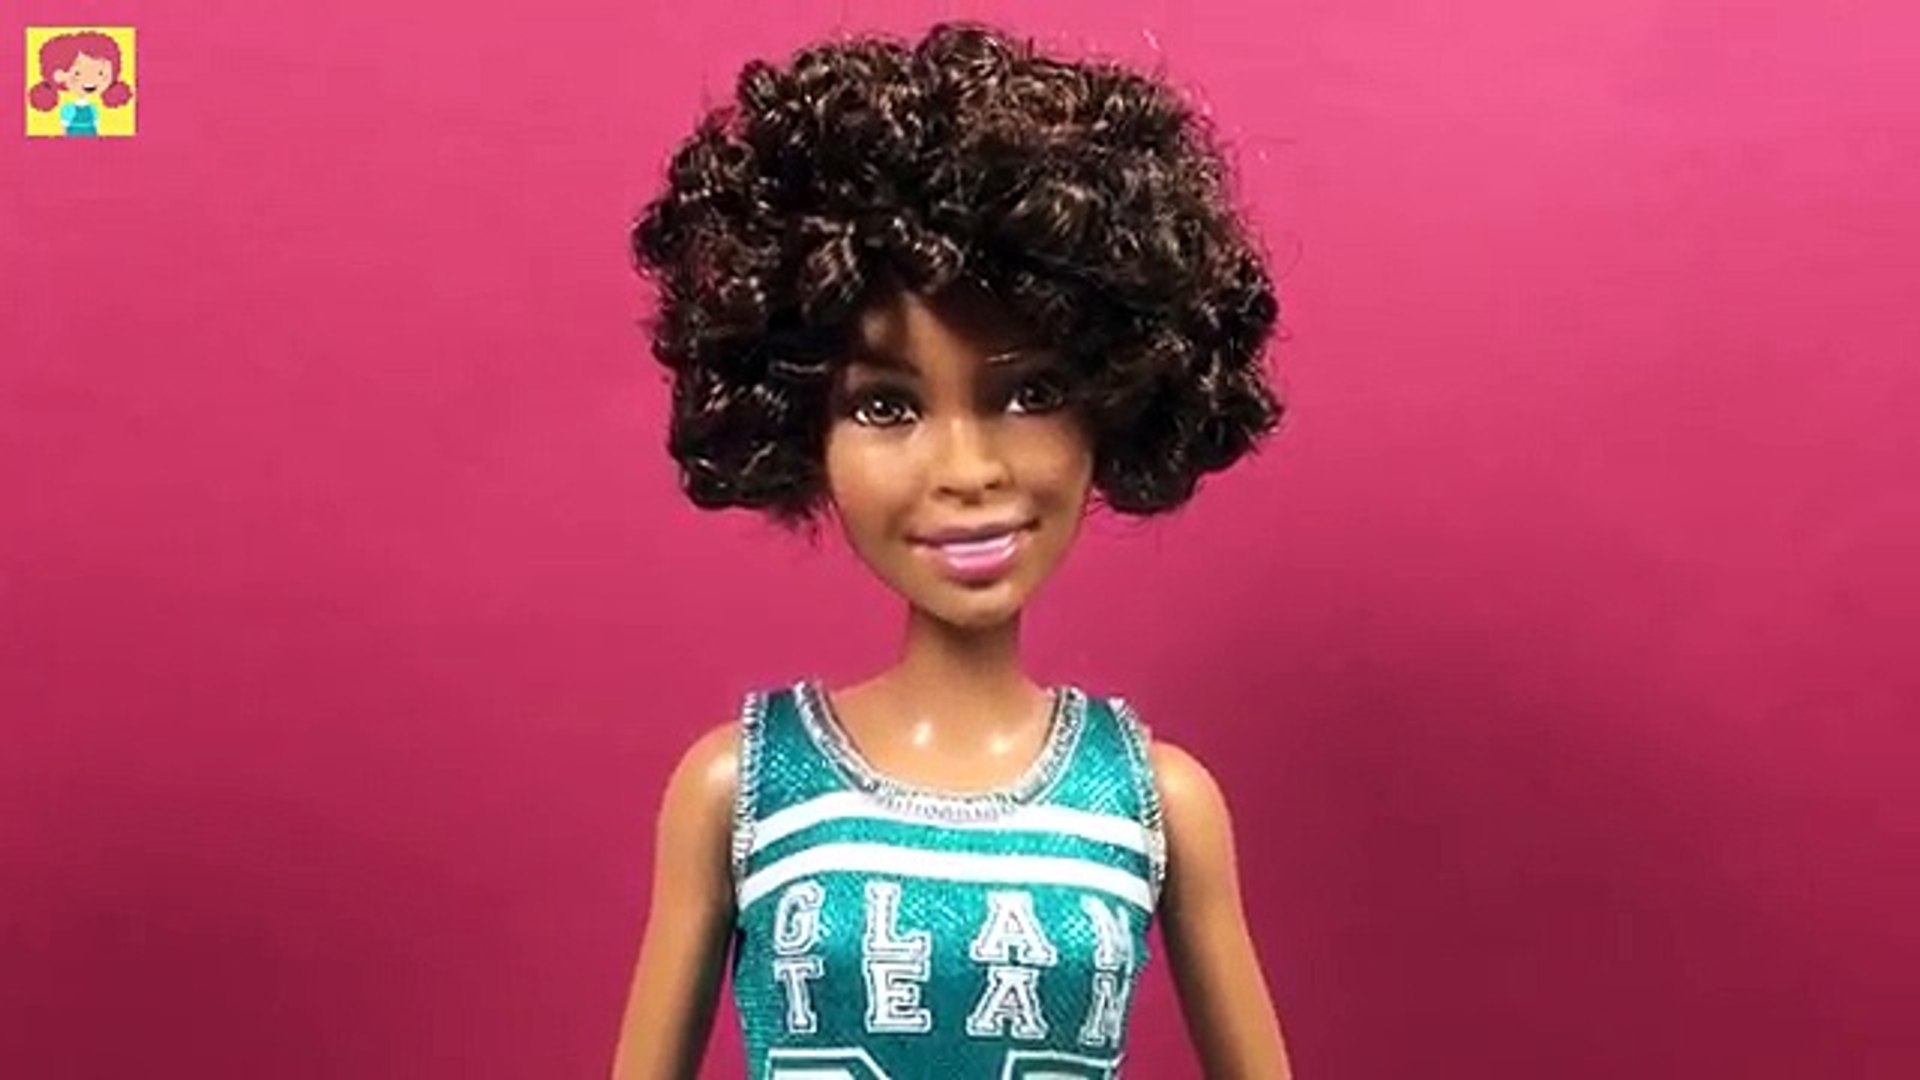 How to Make Afro Hair for Barbie Doll - DIY Doll Hairstyle Tutorial -  Making Kids Toys - Dailymotion Video